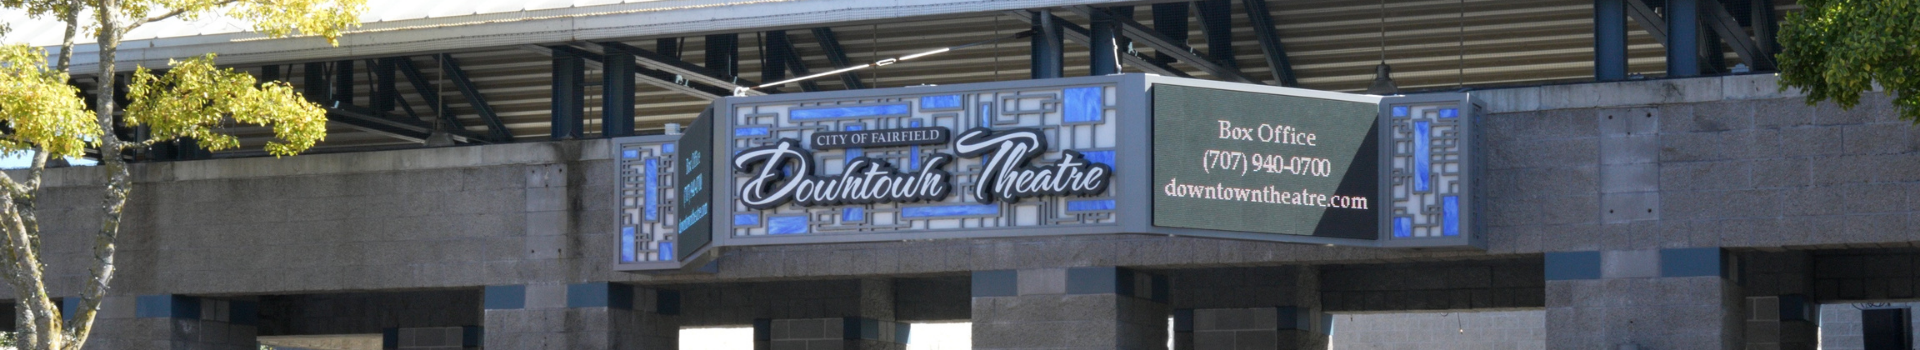 Downtown Theater in Fairfield